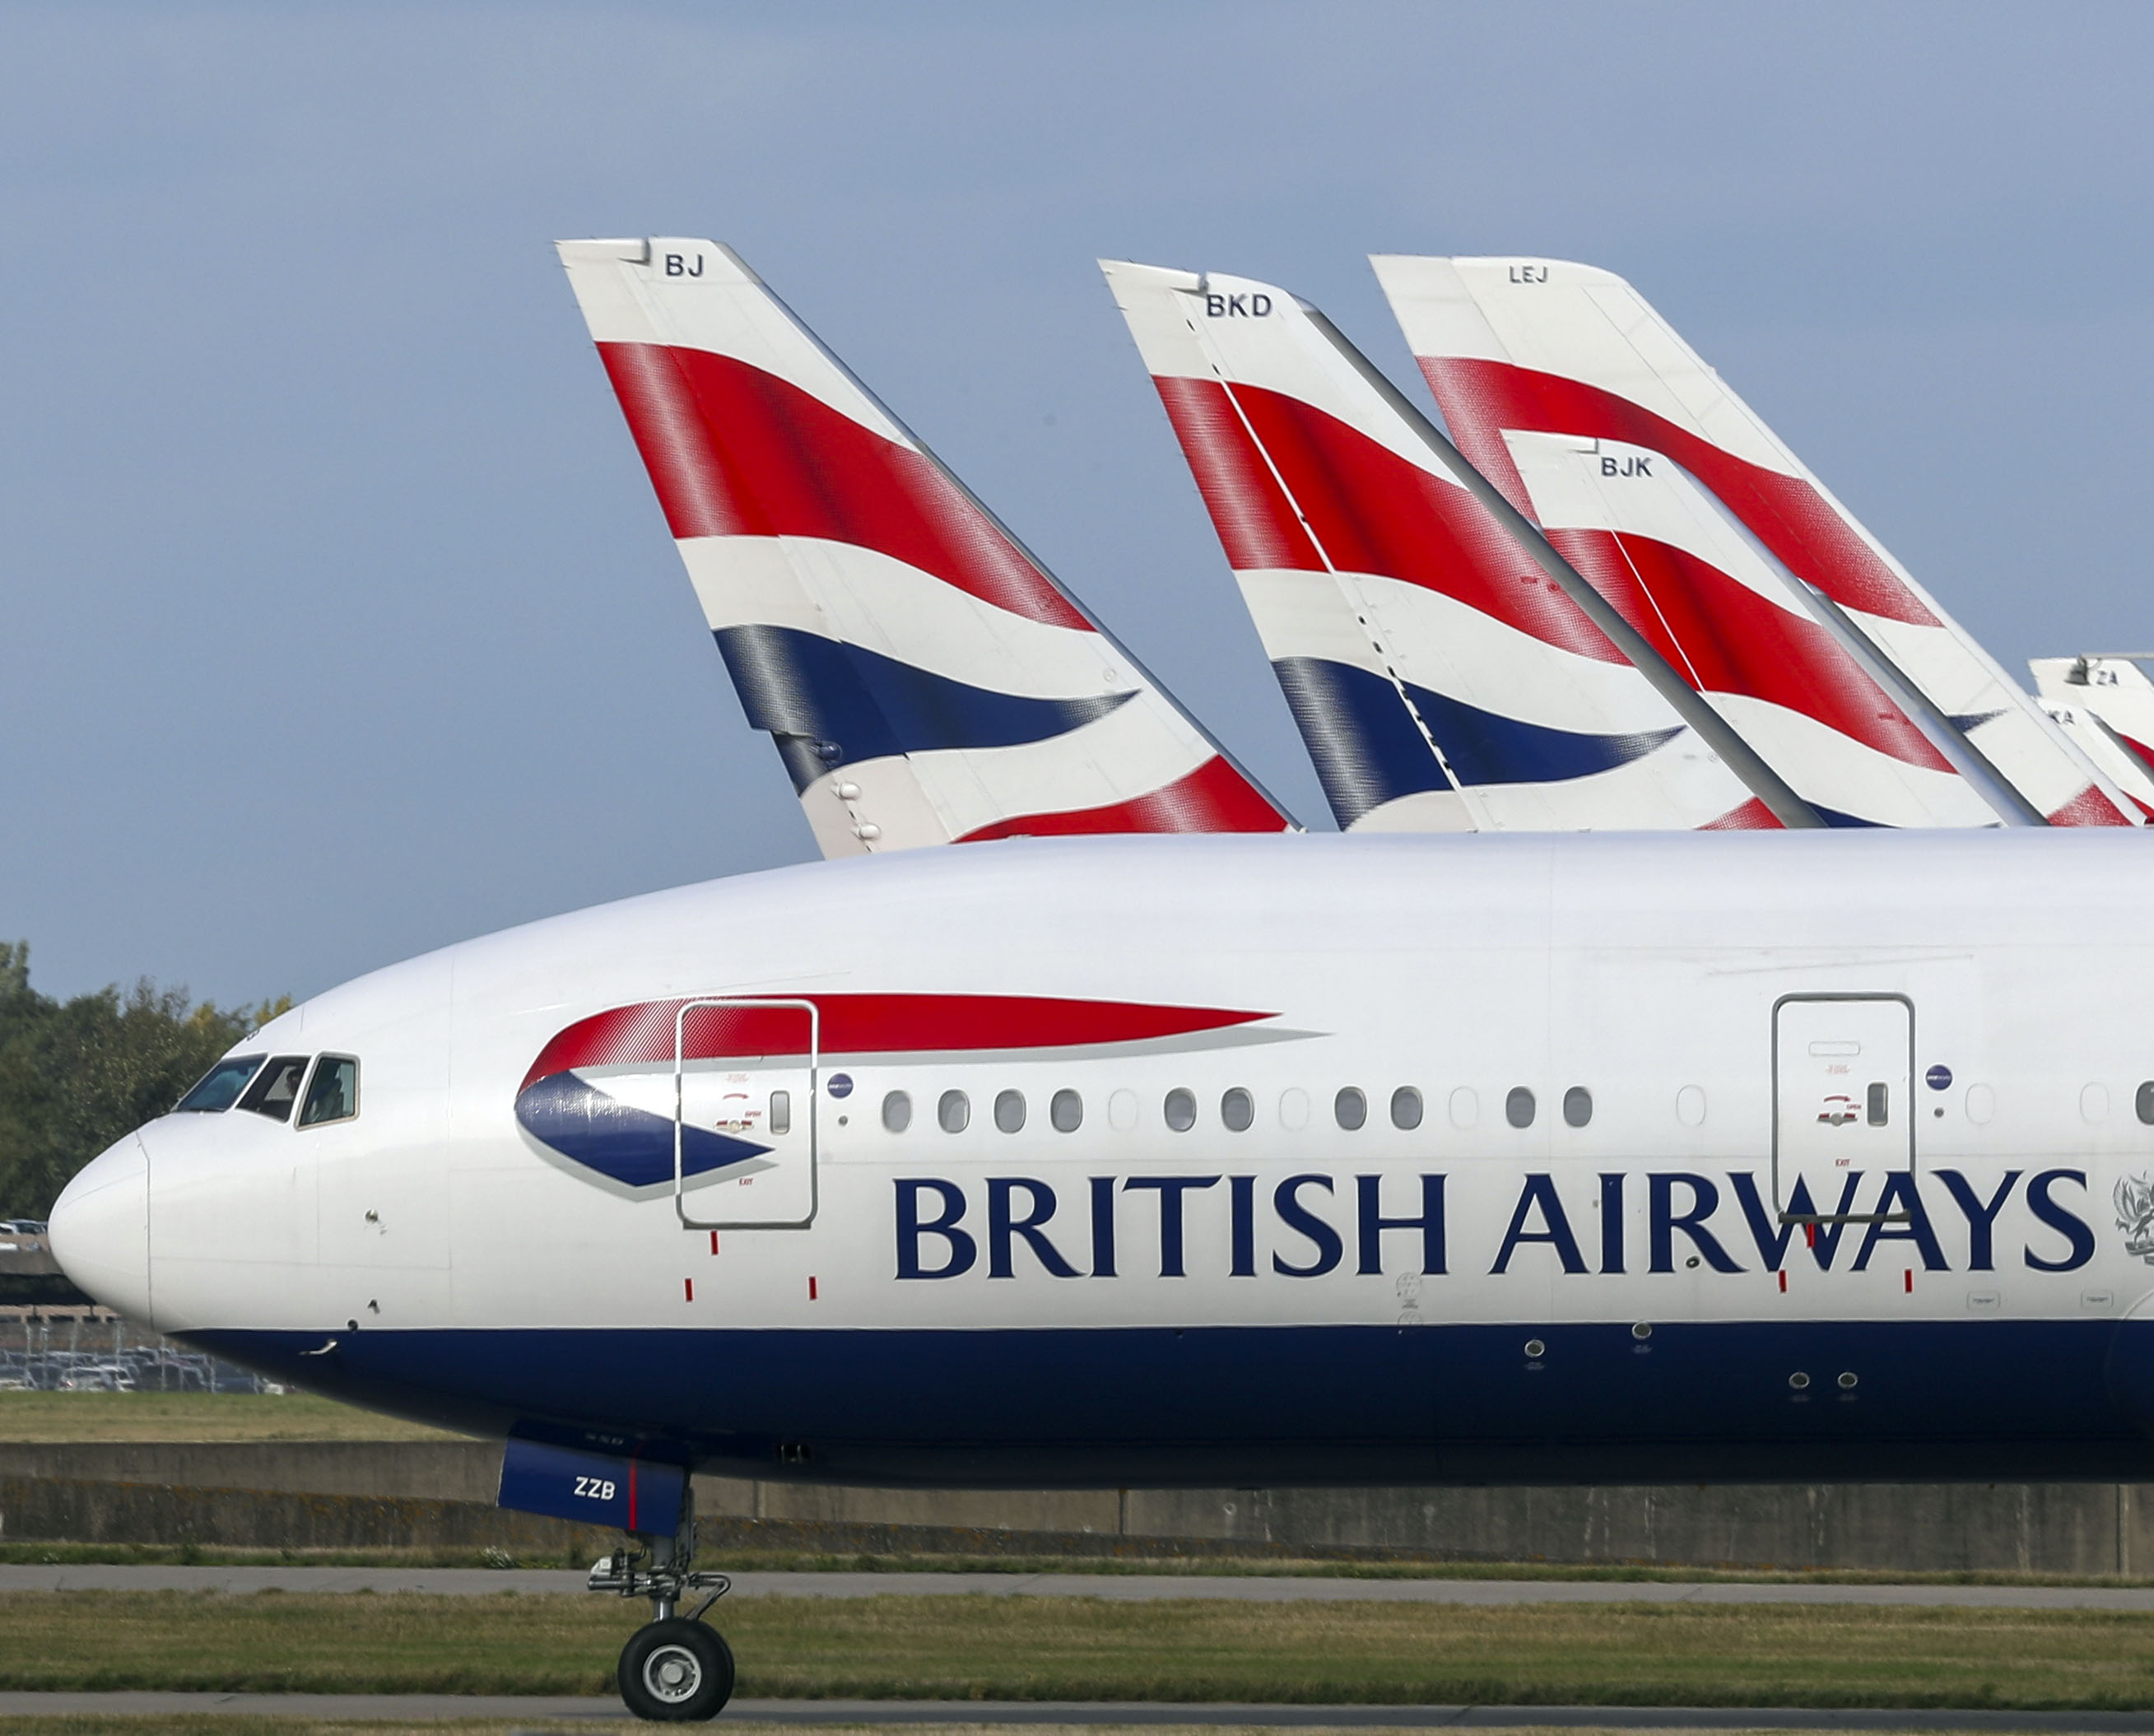 British Airways fares proved to be the most cost-effective on two routes